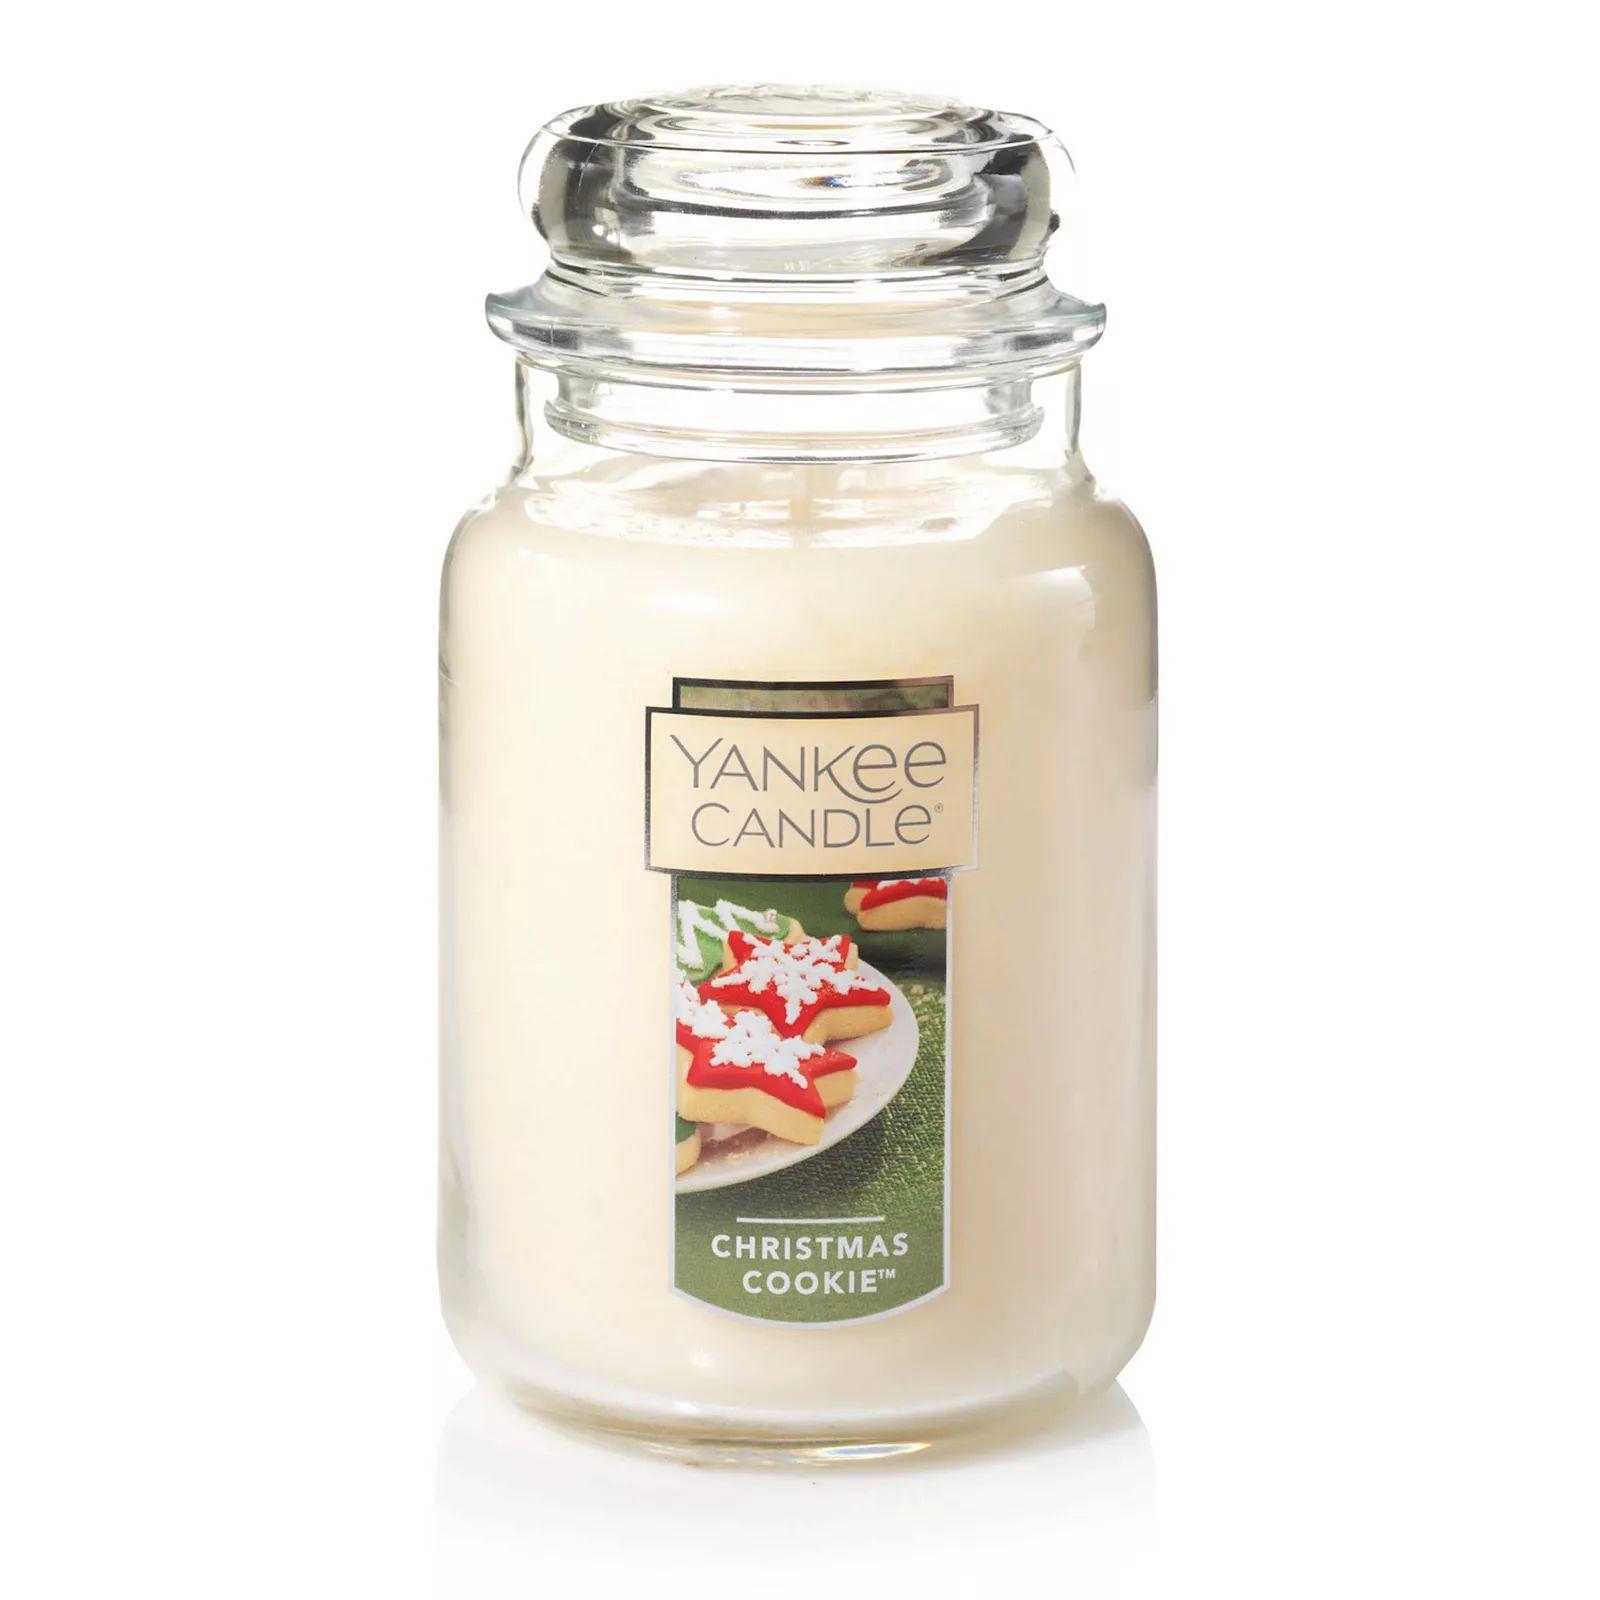 Yankee Candle Christmas Cookie 22-oz. Large Candle Jar | Kohl's